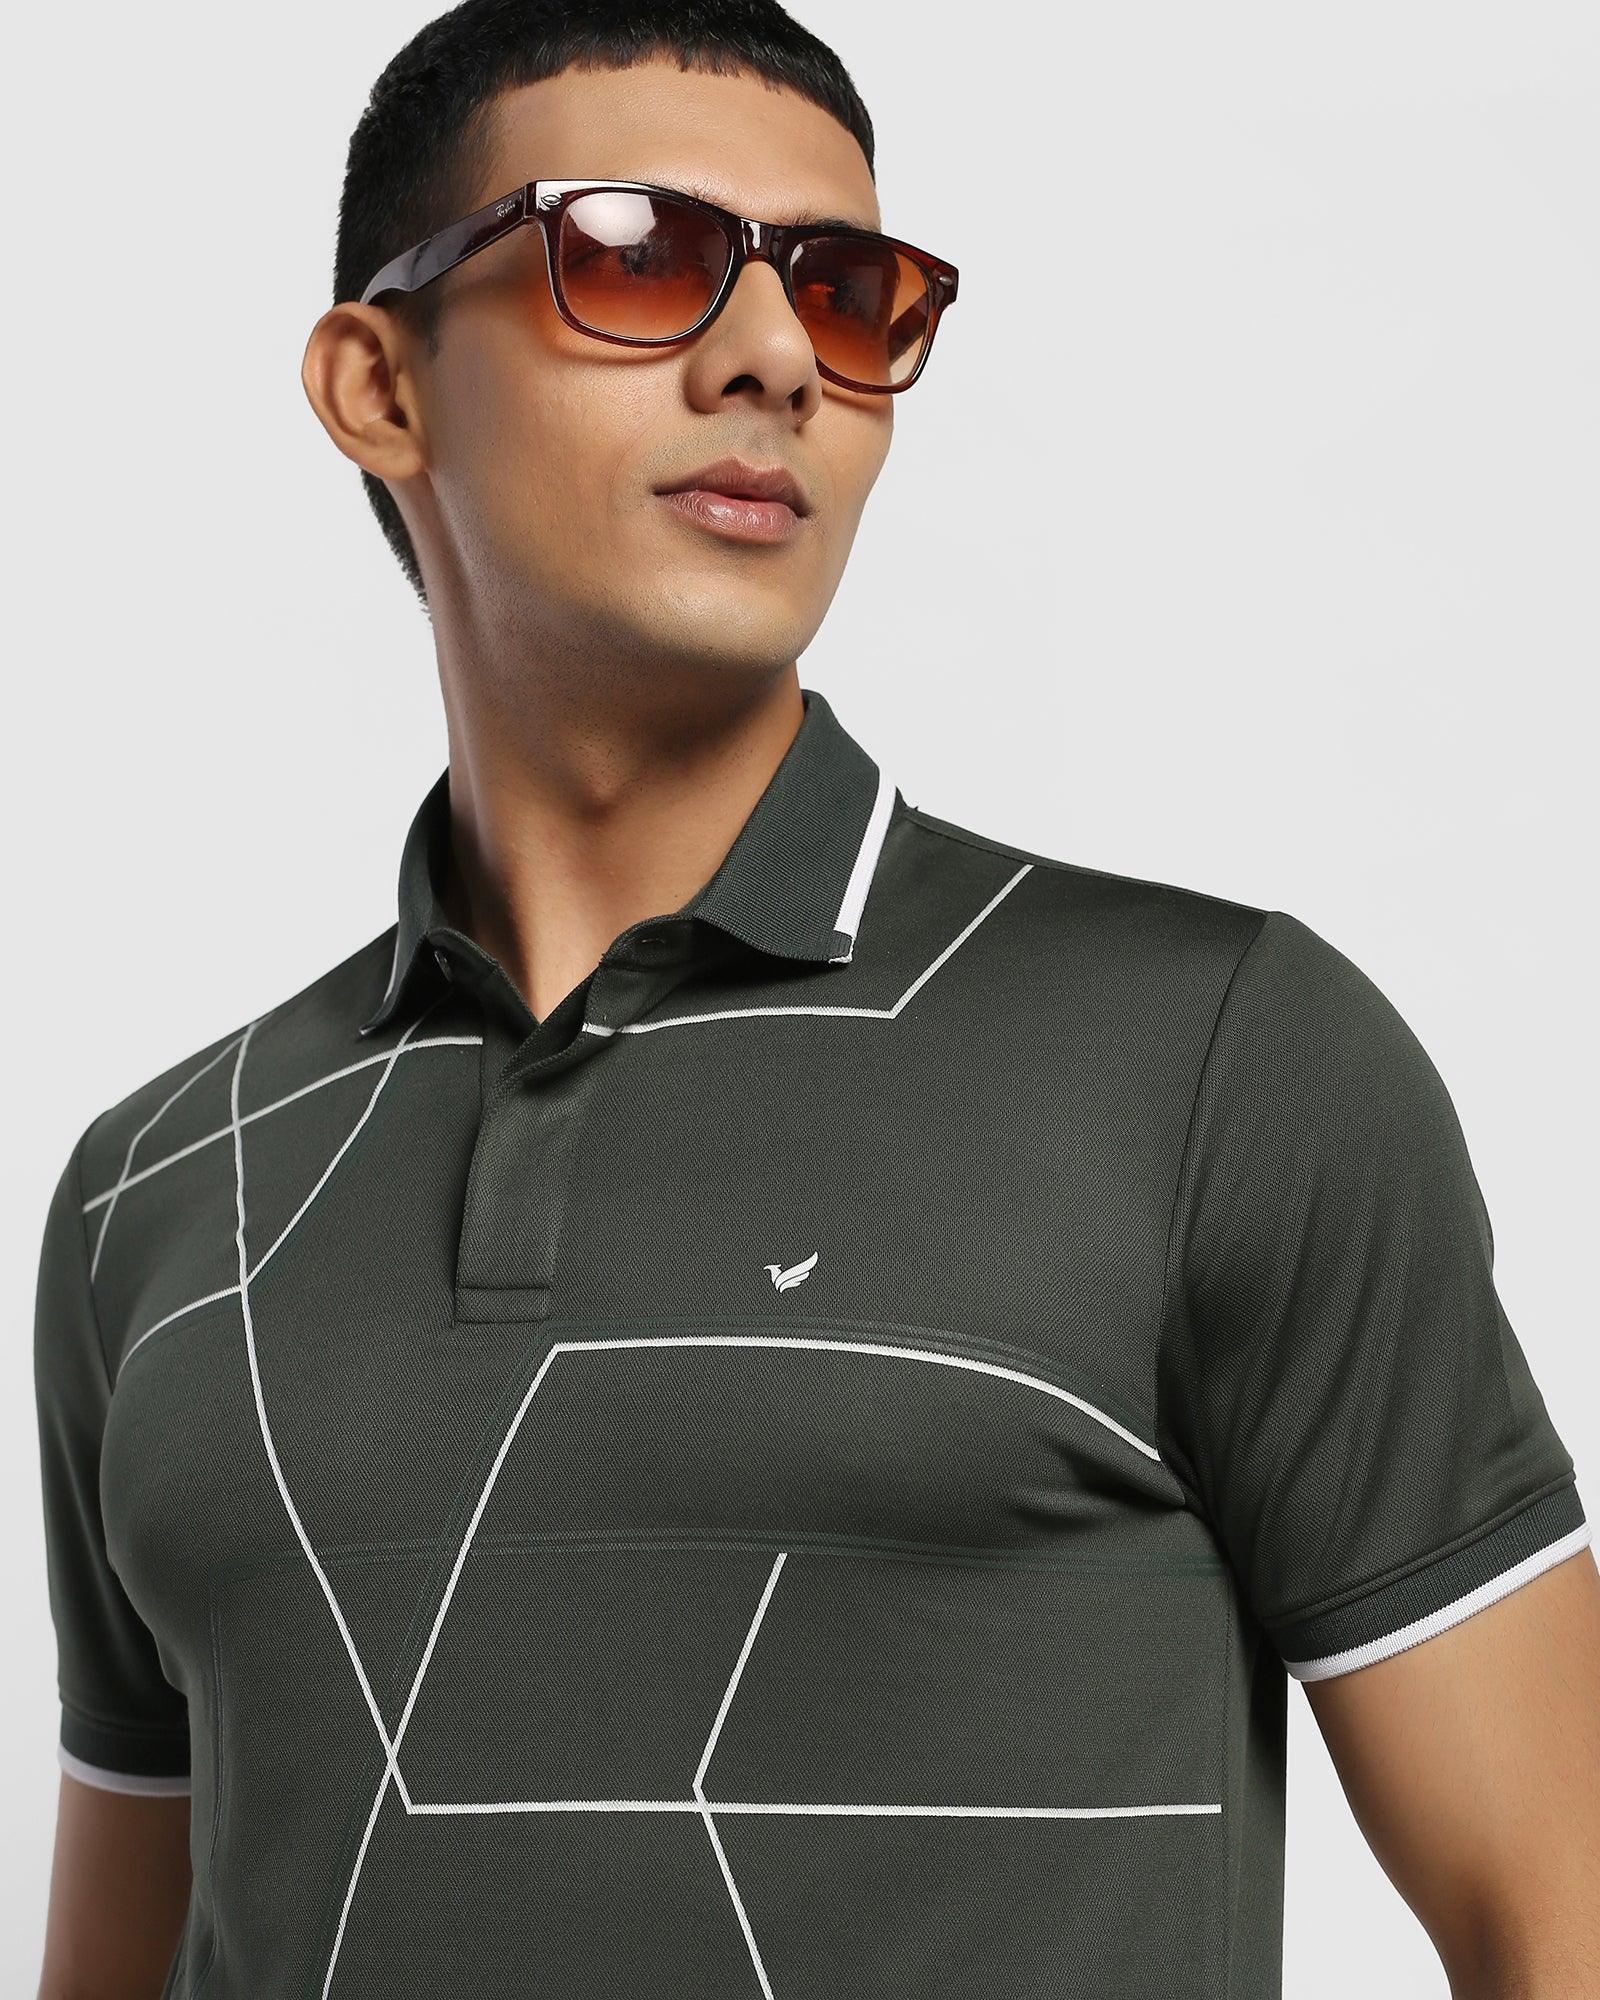 TechPro Polo Olive Printed T Shirt - Cross